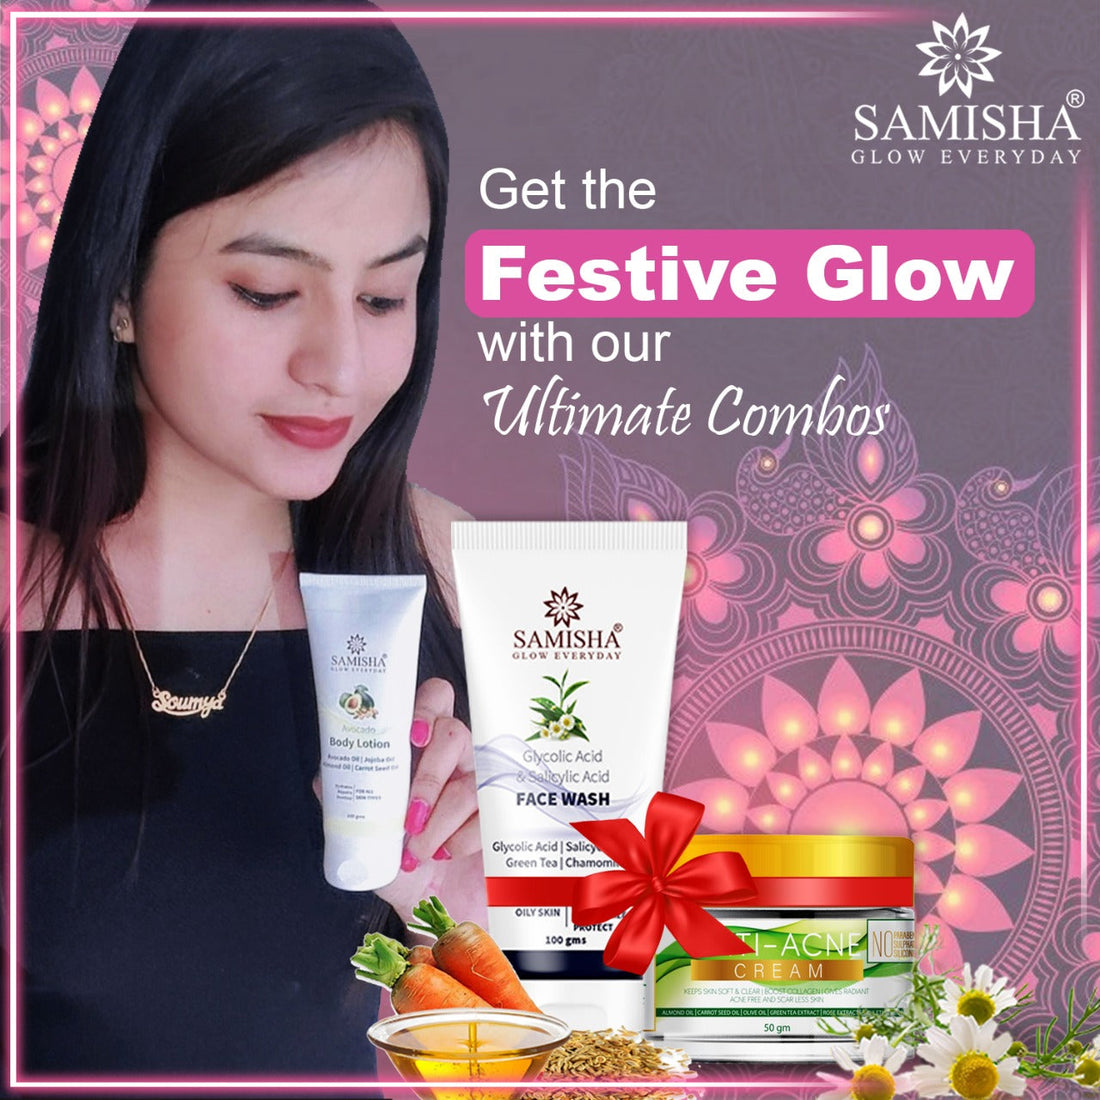 Beauty Products - The Perfect Gift For Your Family And Friends On The Occasion Of Diwali